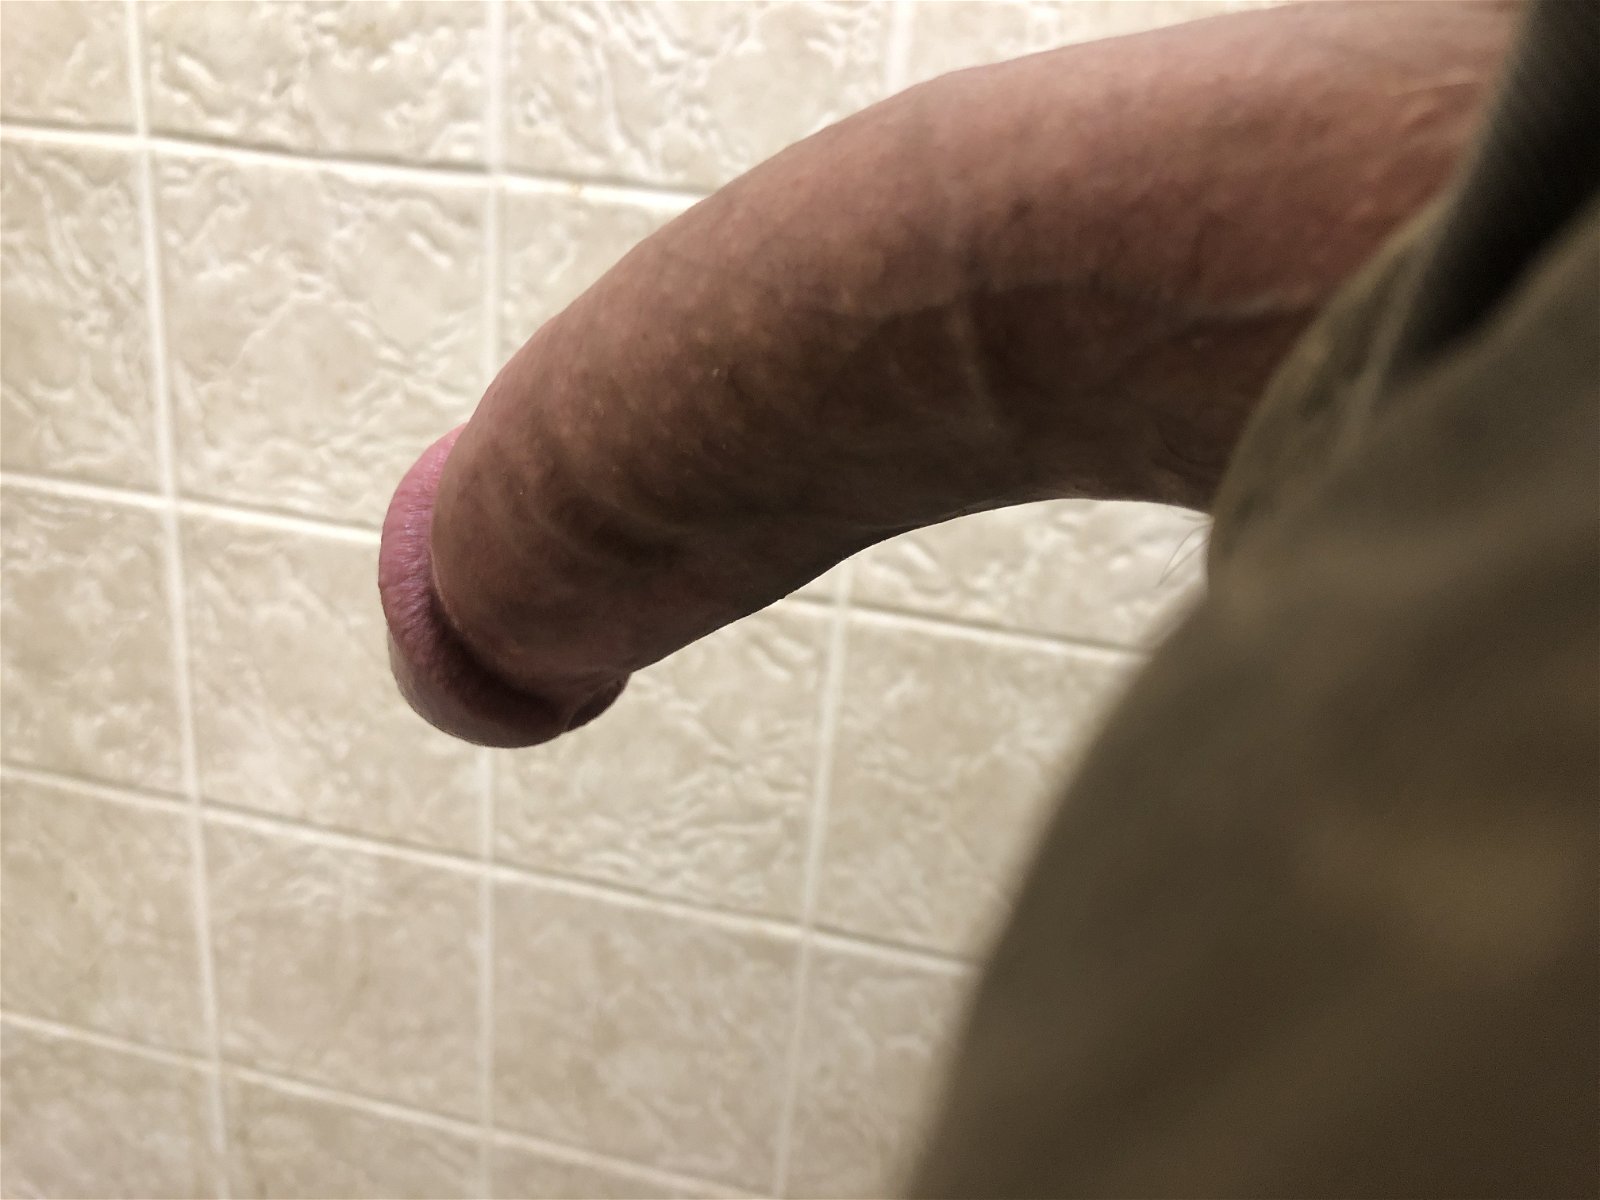 Watch the Photo by undefined with the username @undefined, posted on September 21, 2020. The post is about the topic Rate my pussy or dick. and the text says 'sausage anyone?'